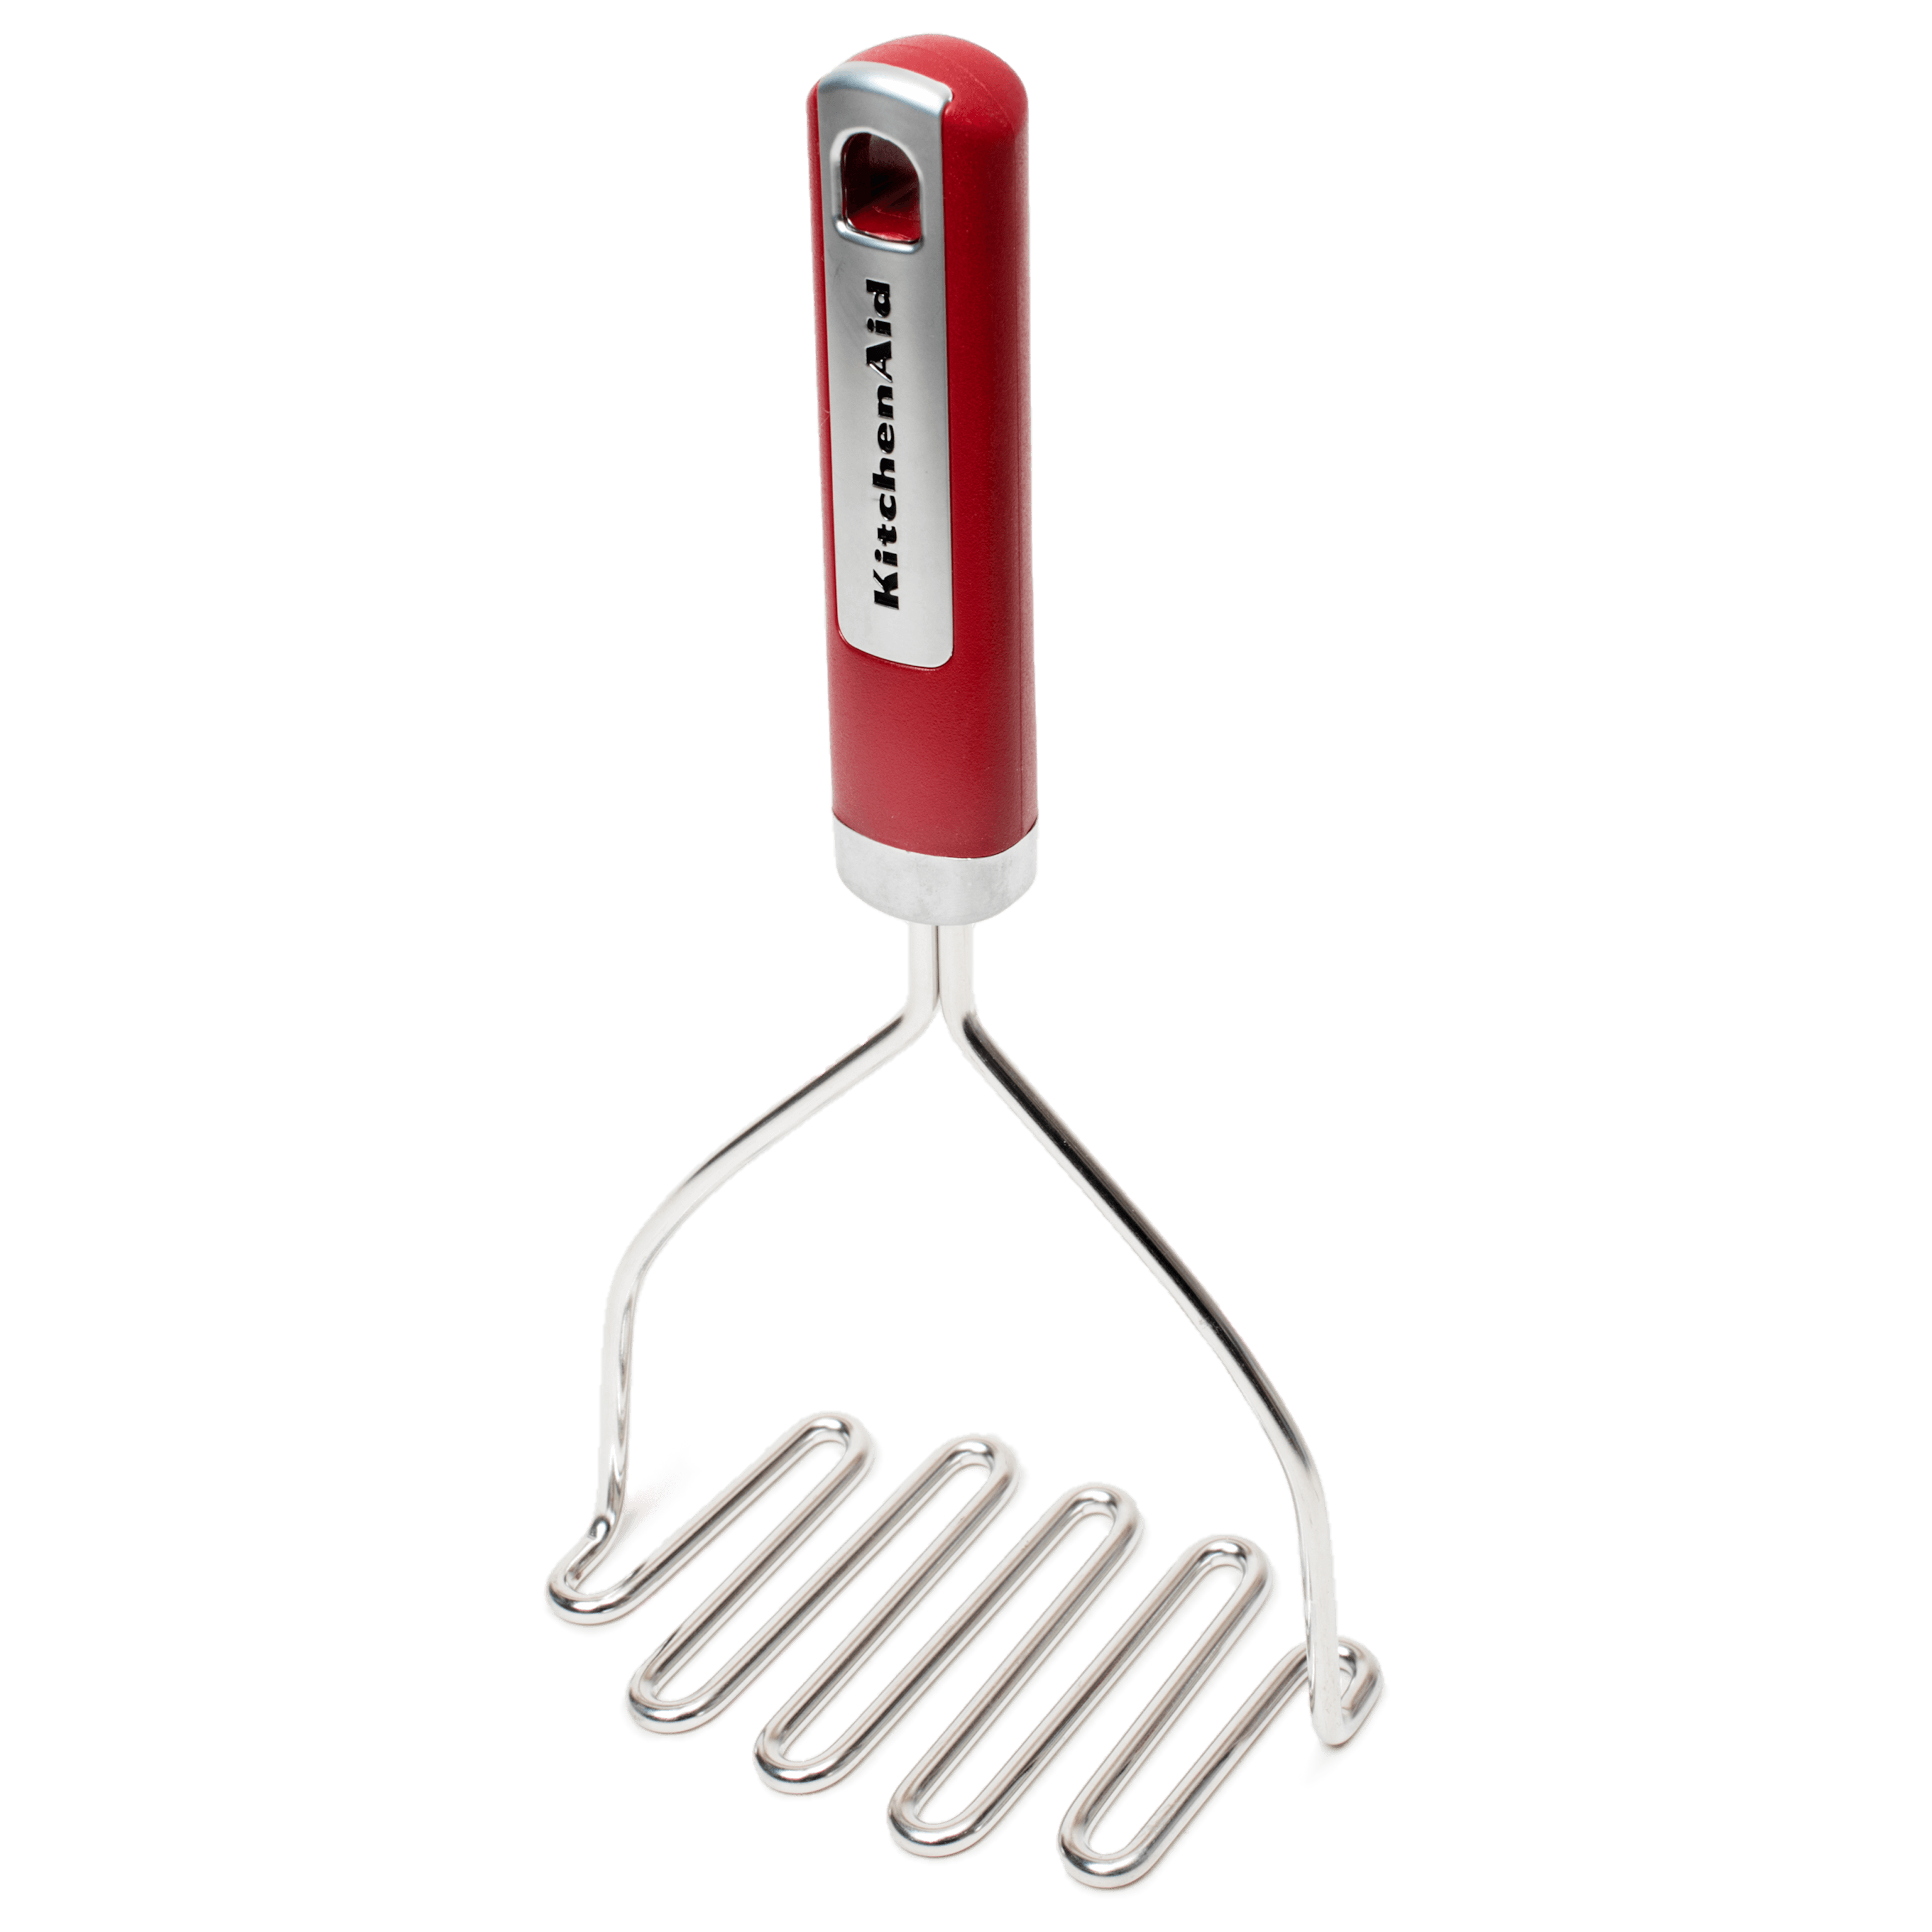 5 Best Potato Mashers 2023 Reviewed, Shopping : Food Network